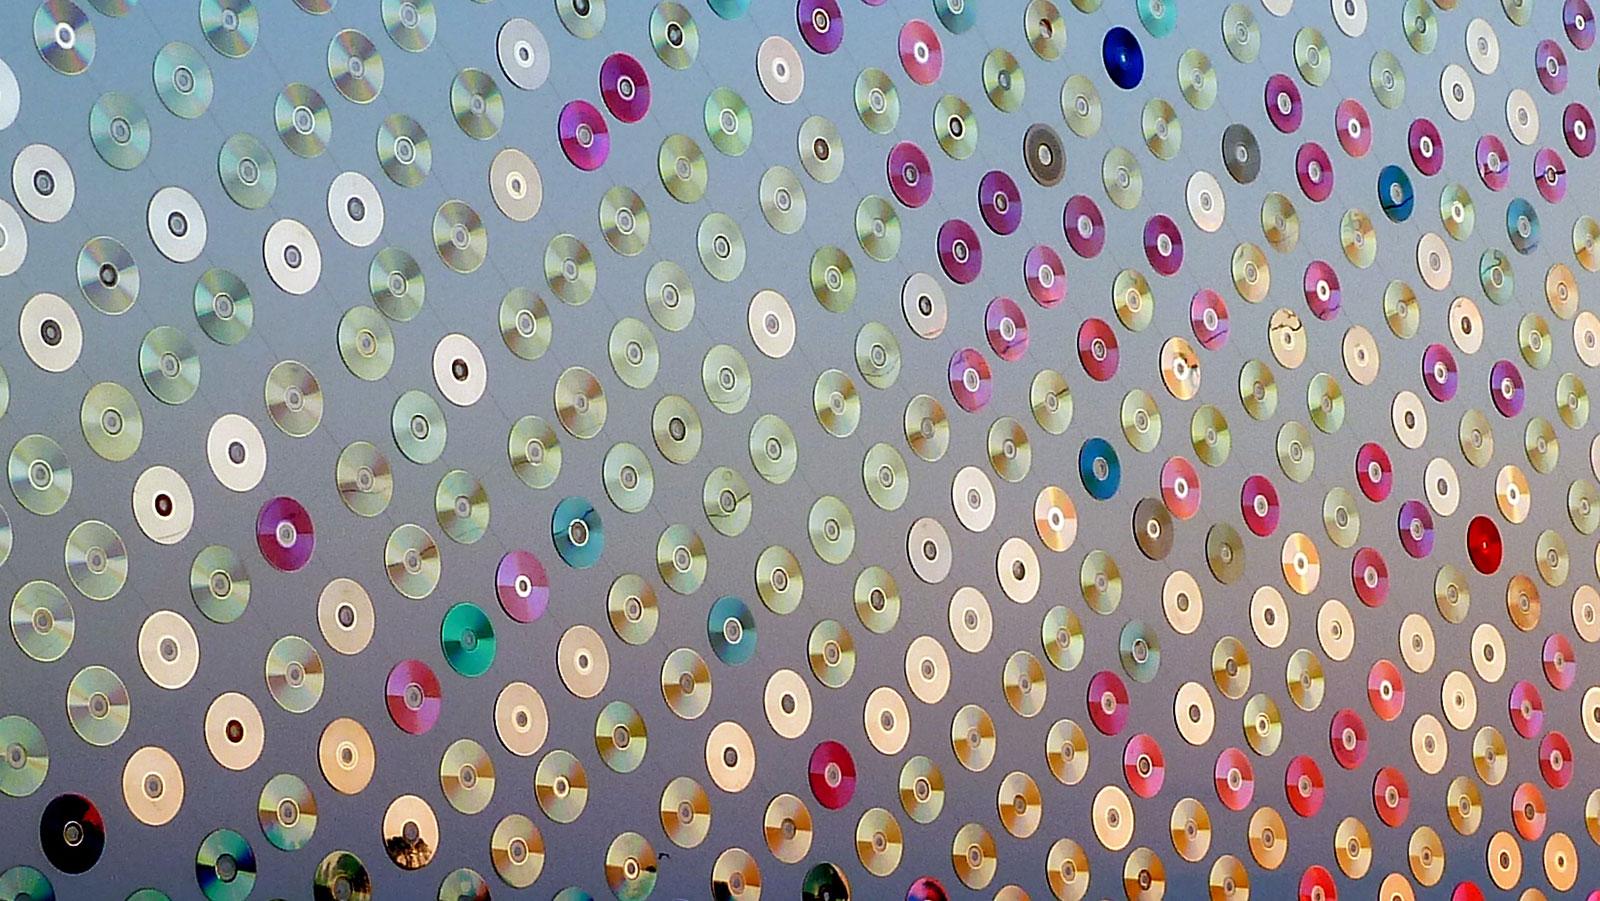 6,000 Used CDs Never Looked So Pretty